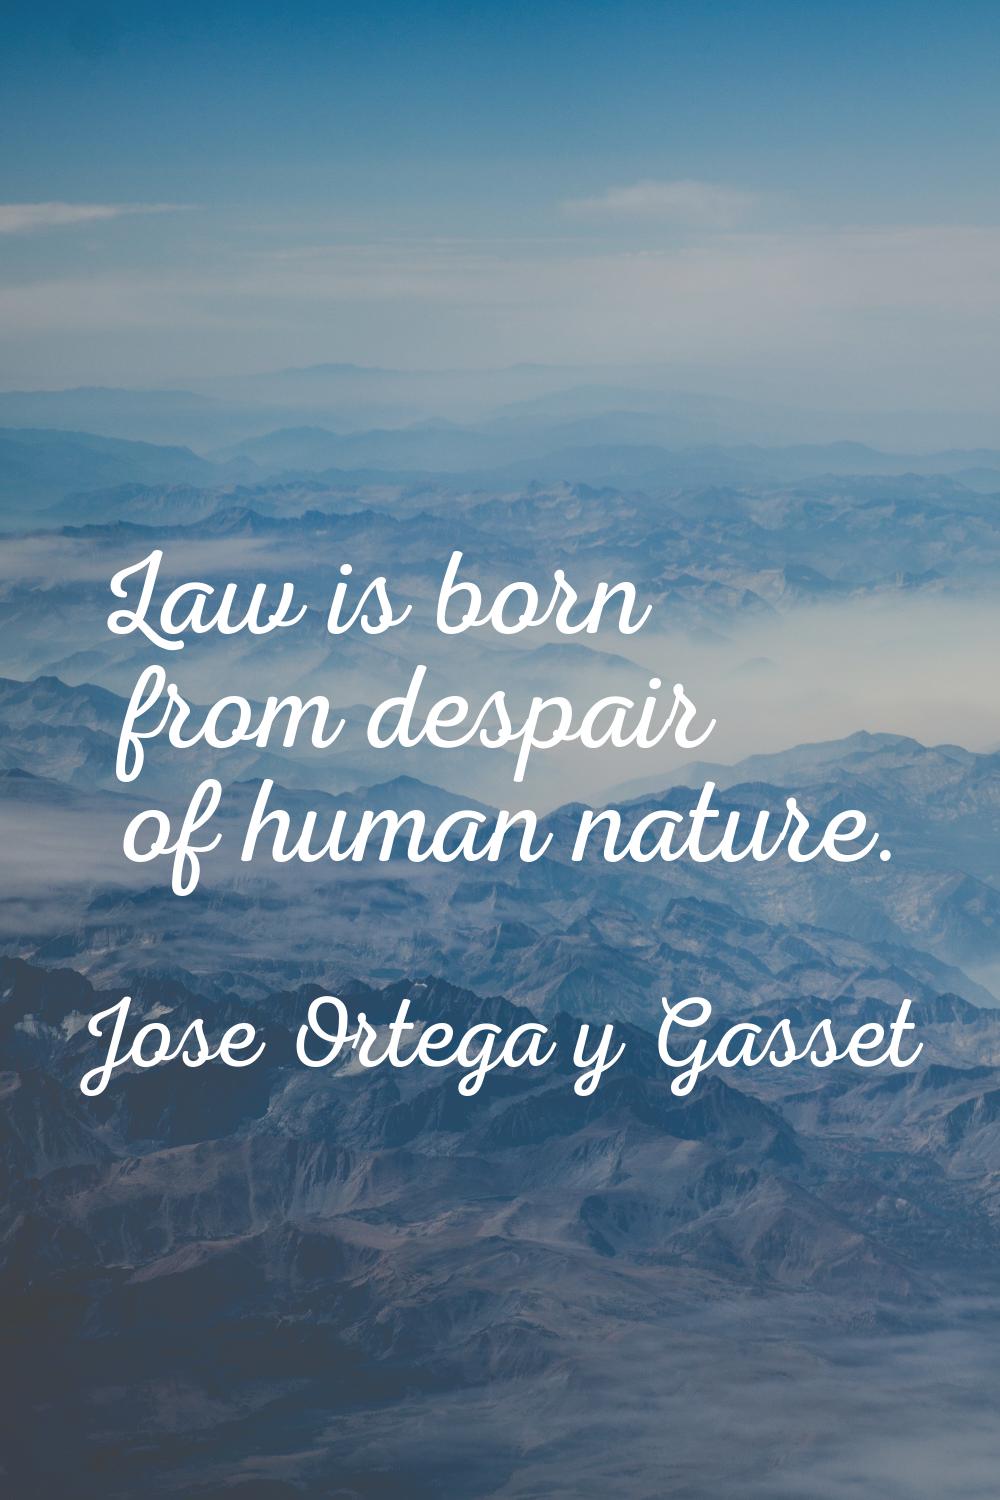 Law is born from despair of human nature.